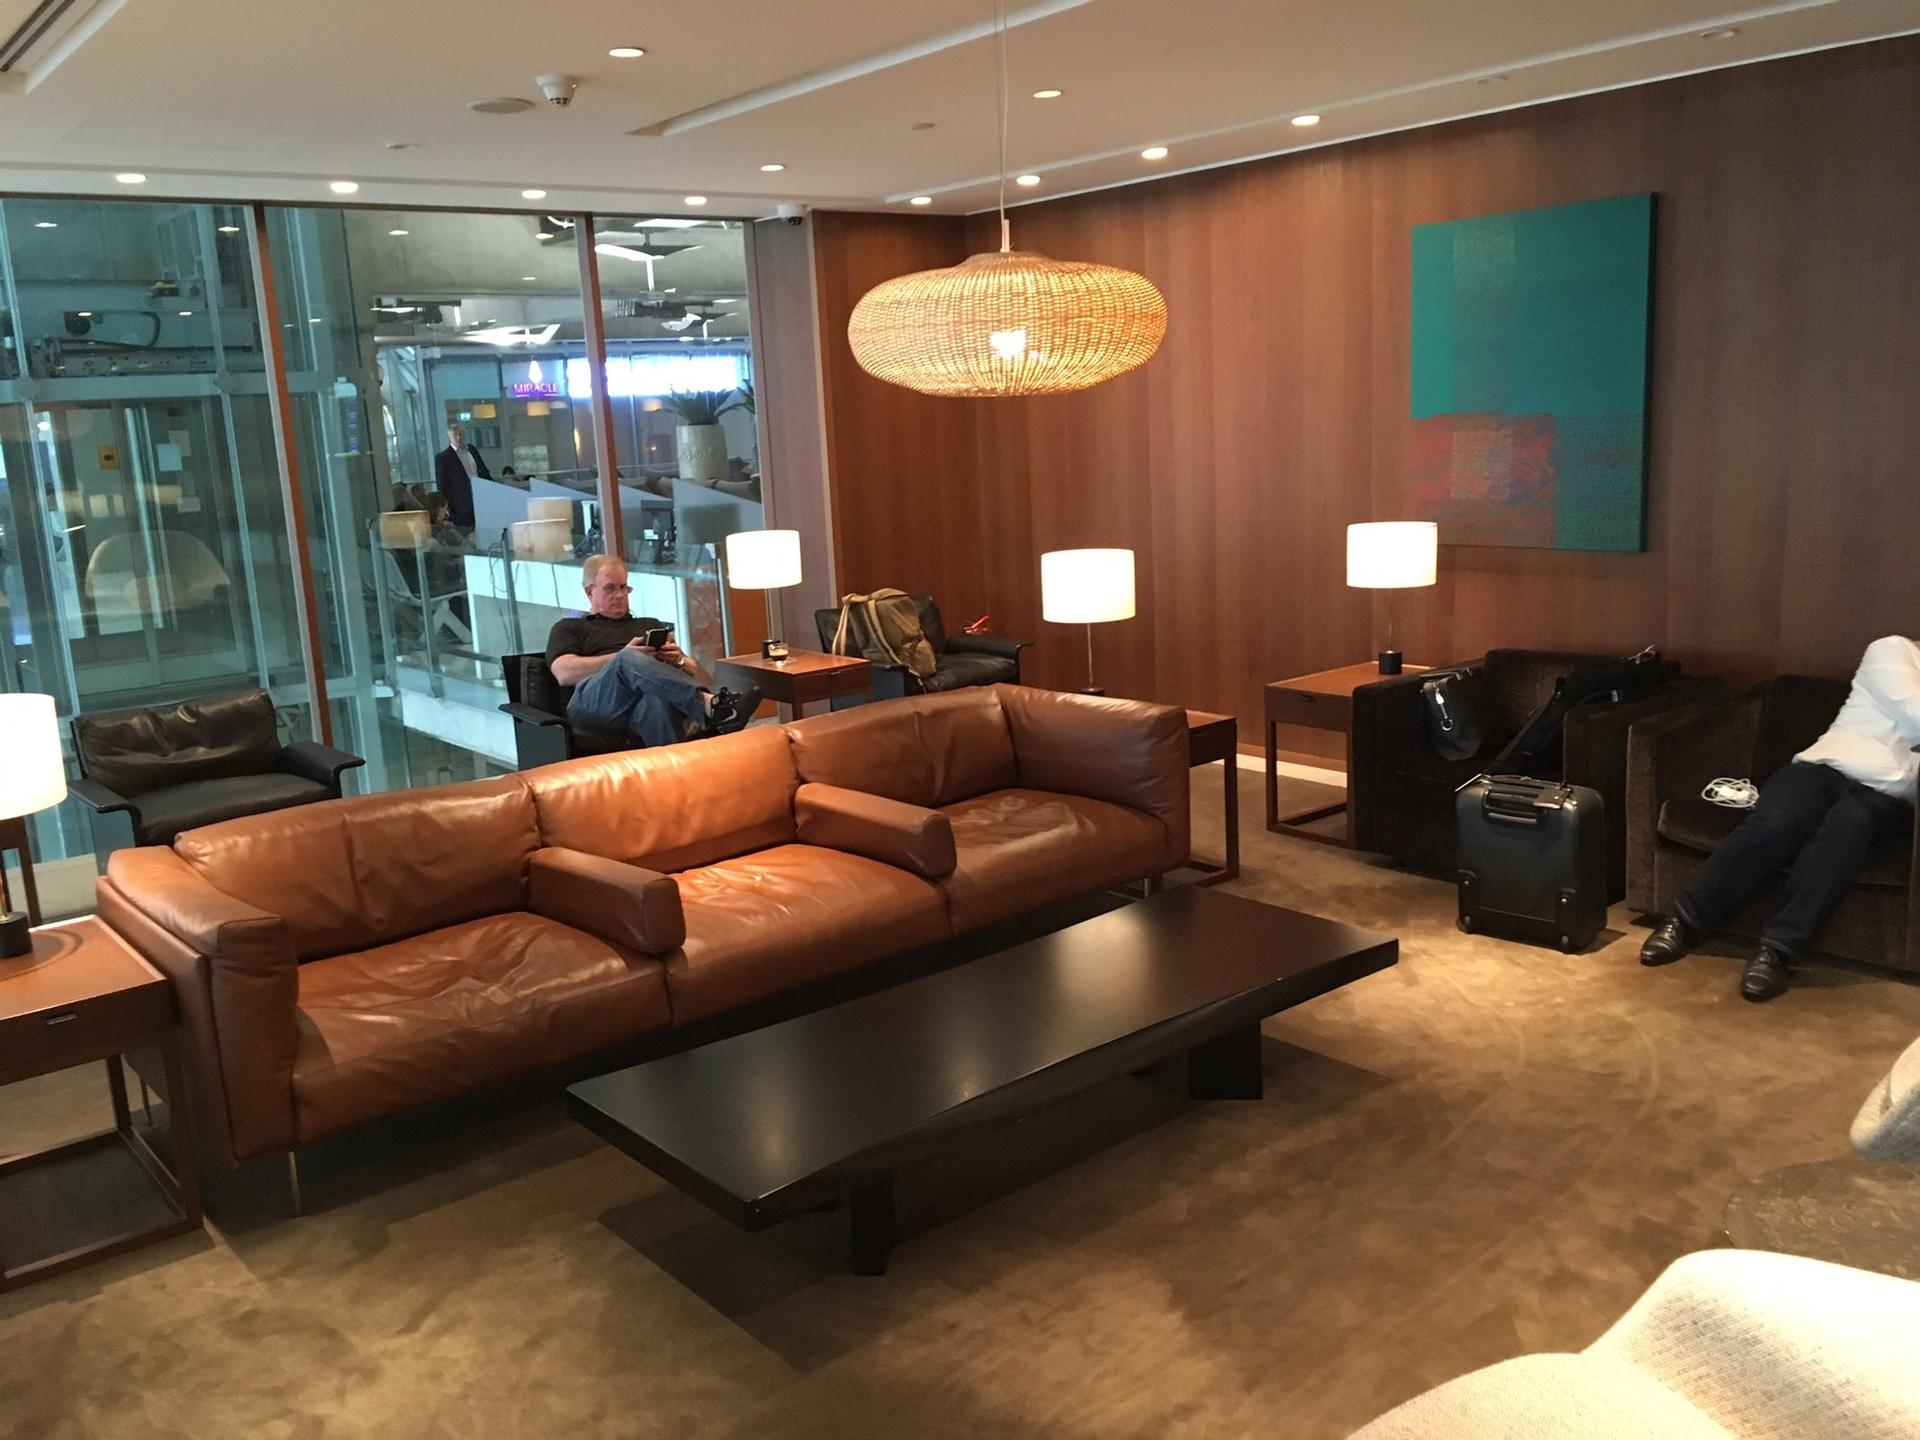 Cathay Pacific First and Business Class Lounge image 15 of 69